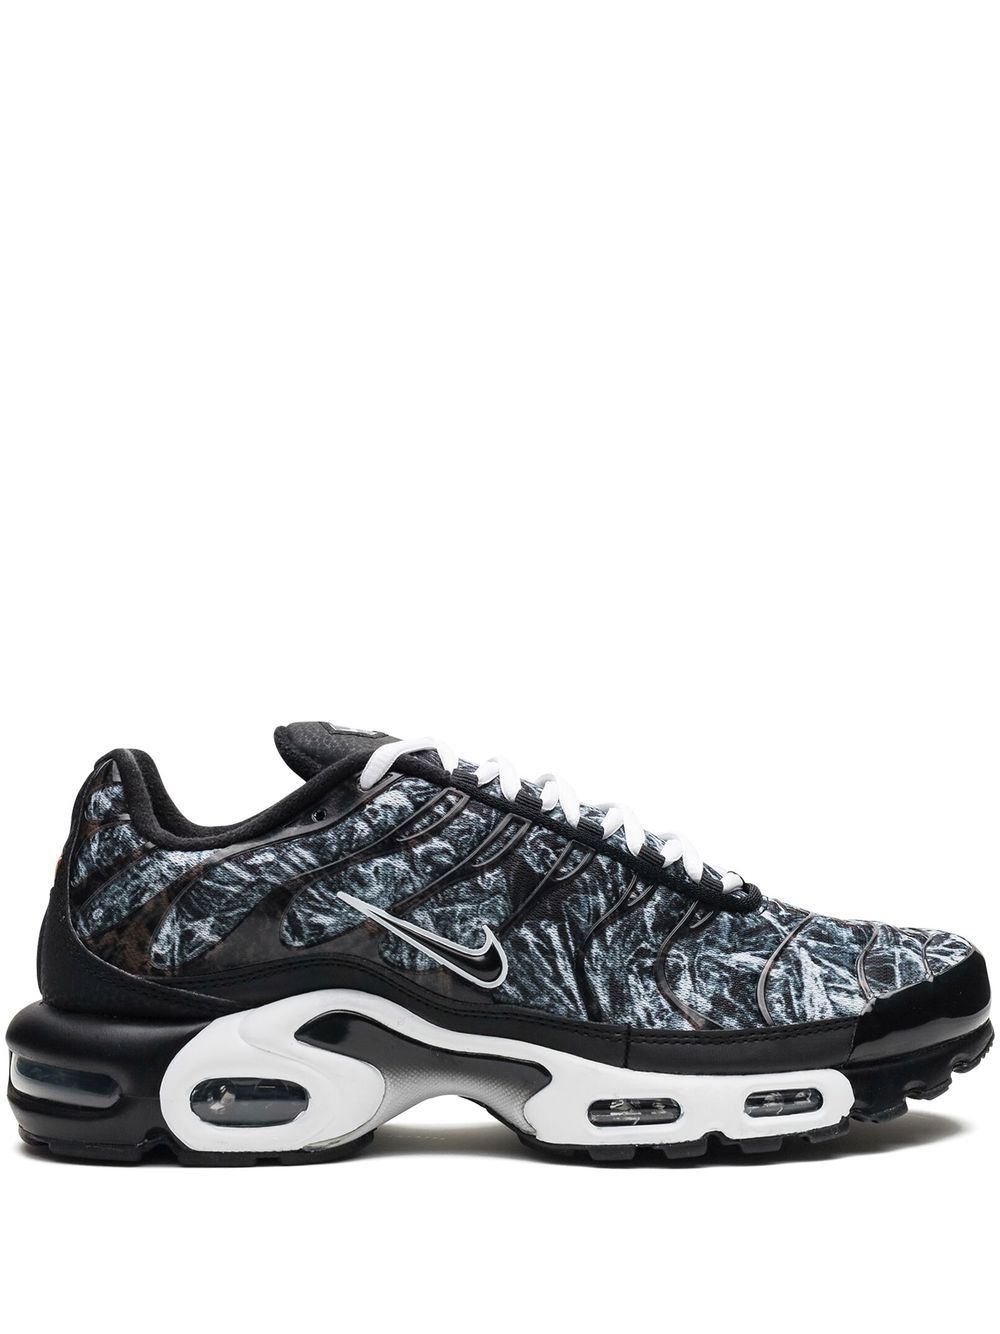 Air Max Plus AMP "Shattered Ice" sneakers - 1